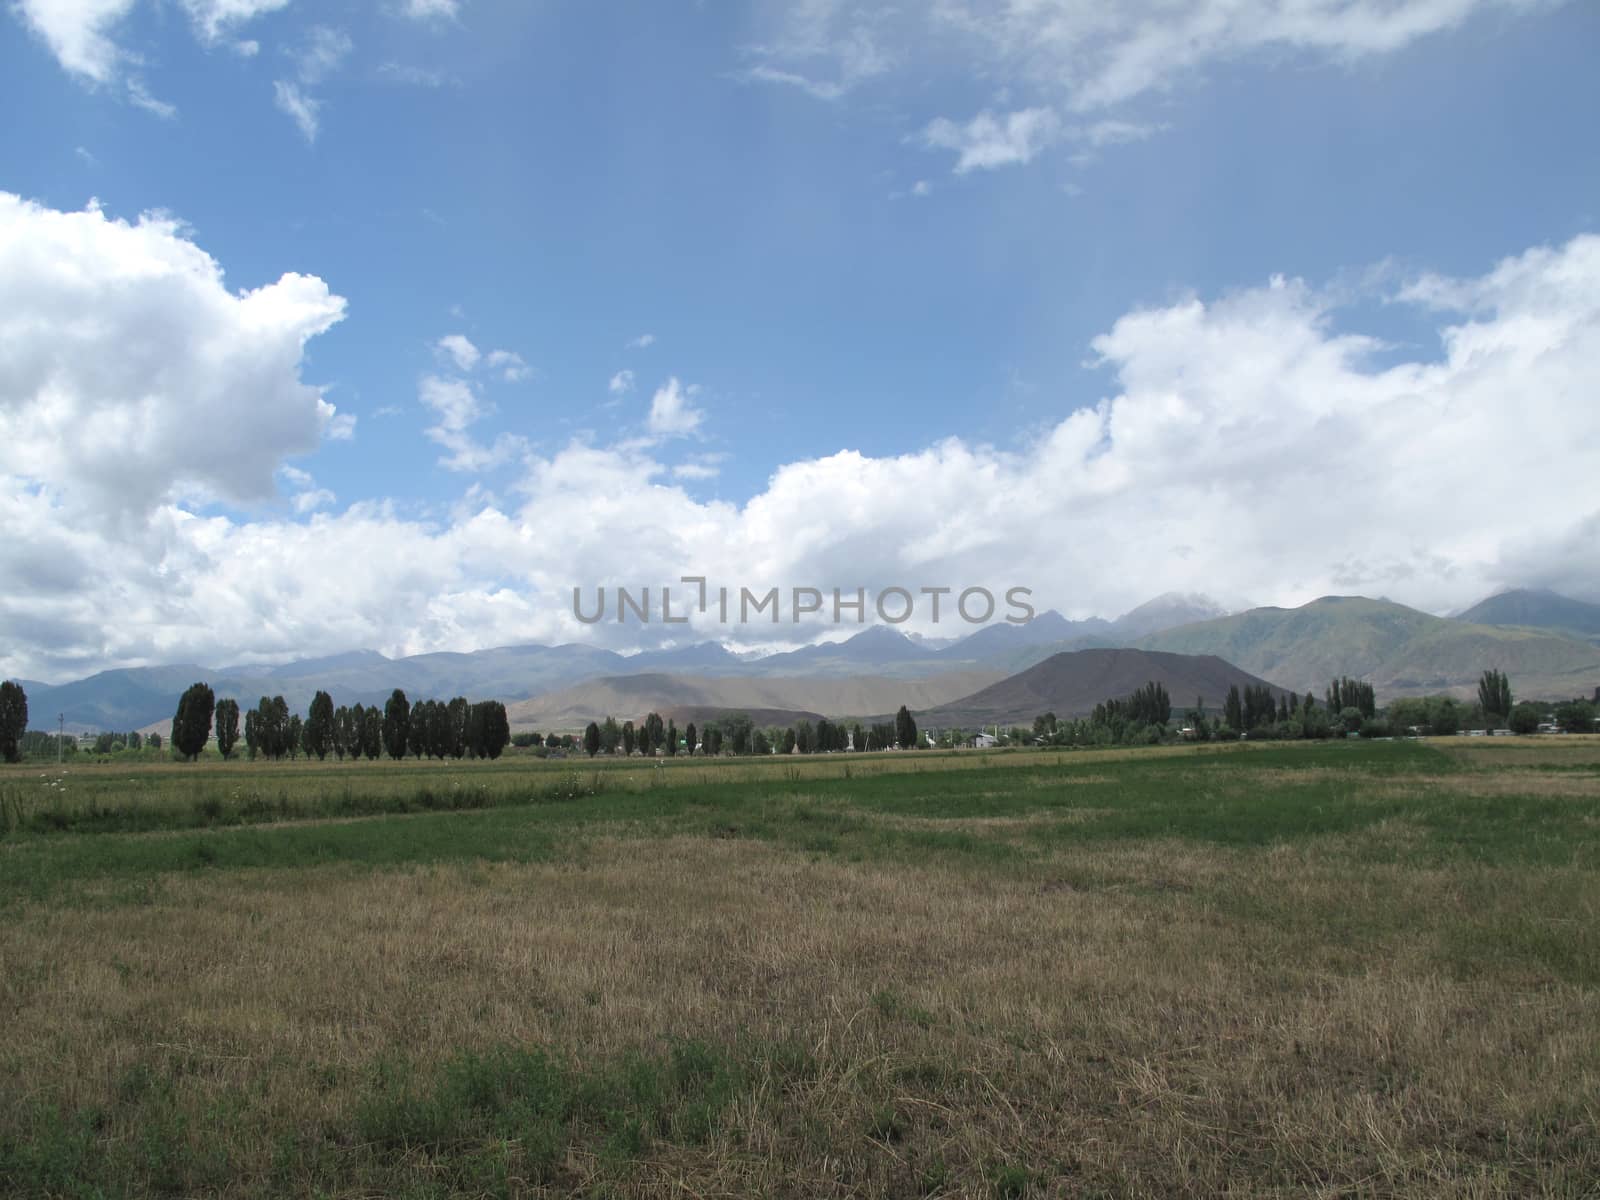 ield in the mountains of Kyrgyzstan Issyk-Kul region near the village and the beautiful sky